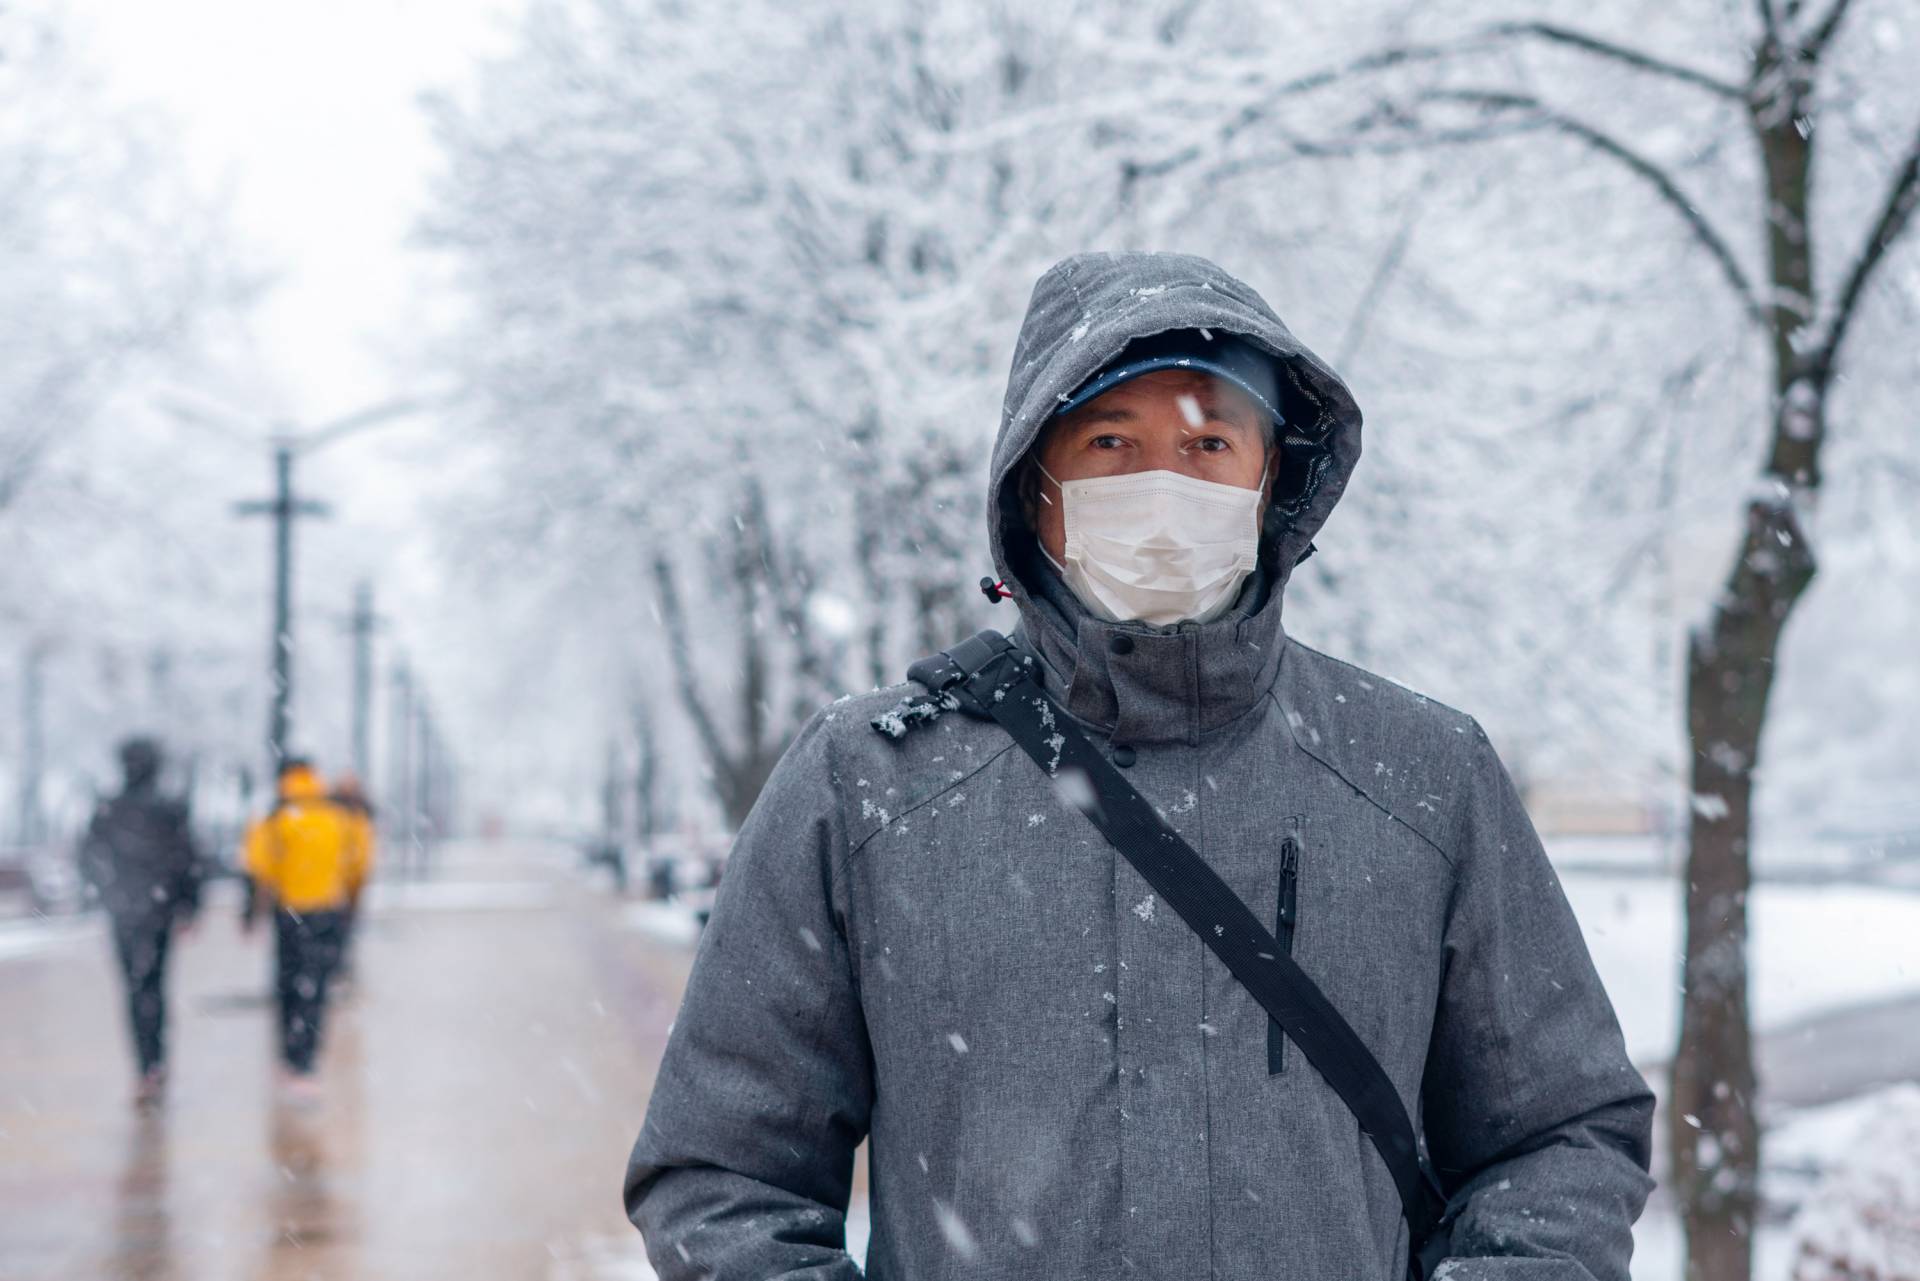 A masked person stands on a snowy walking path